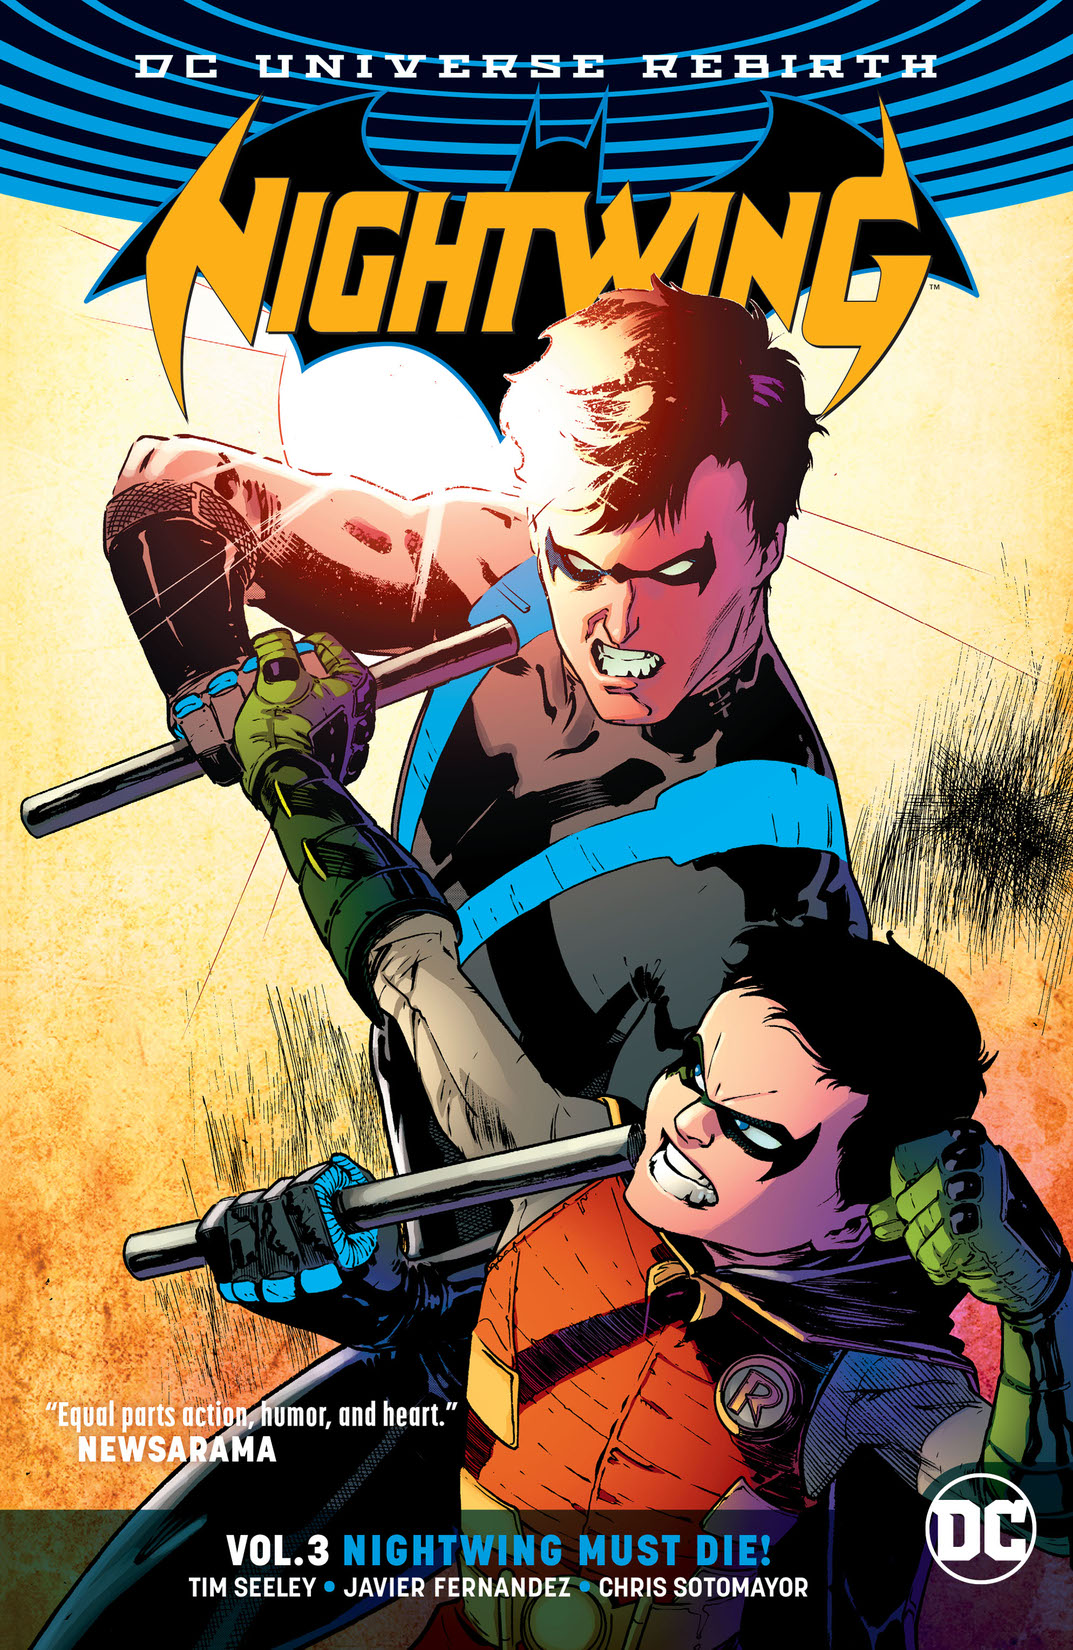 Nightwing Vol. 3: Nightwing Must Die (Rebirth) preview images